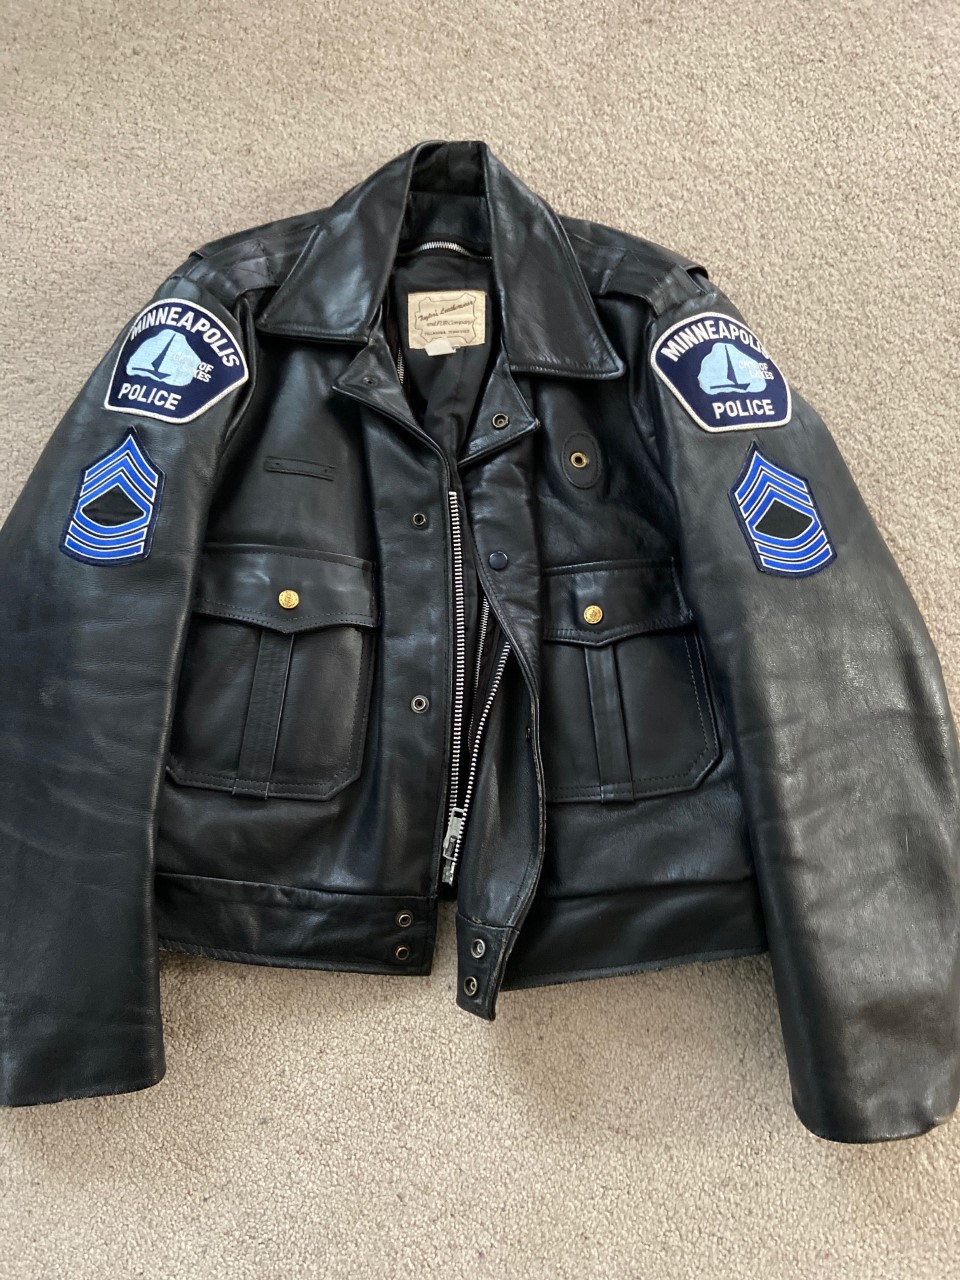 Leather Jackets for Sale | MPD Federation